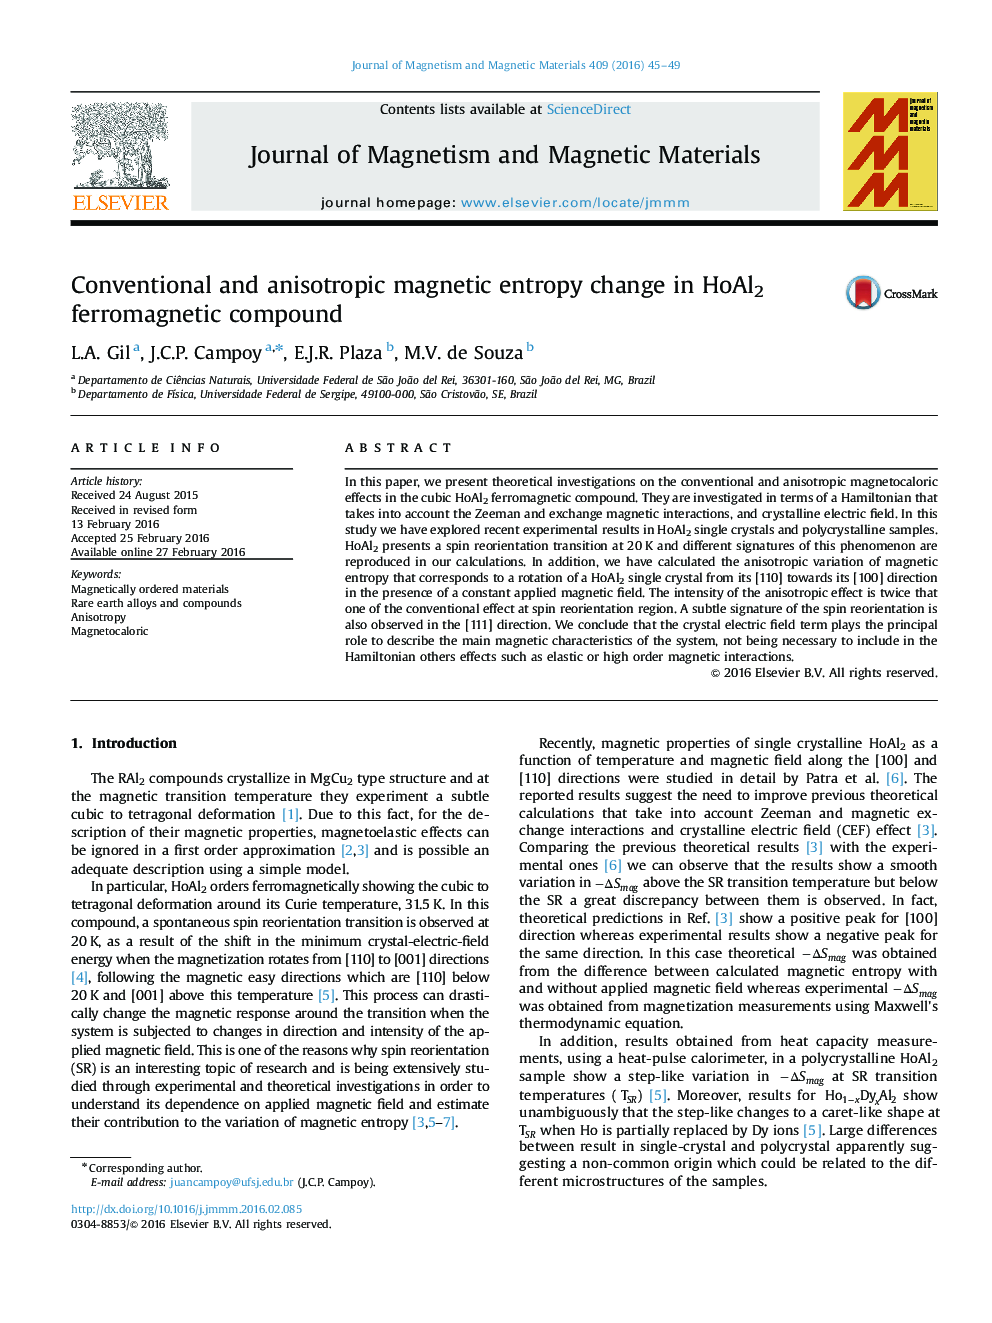 Conventional and anisotropic magnetic entropy change in HoAl2 ferromagnetic compound